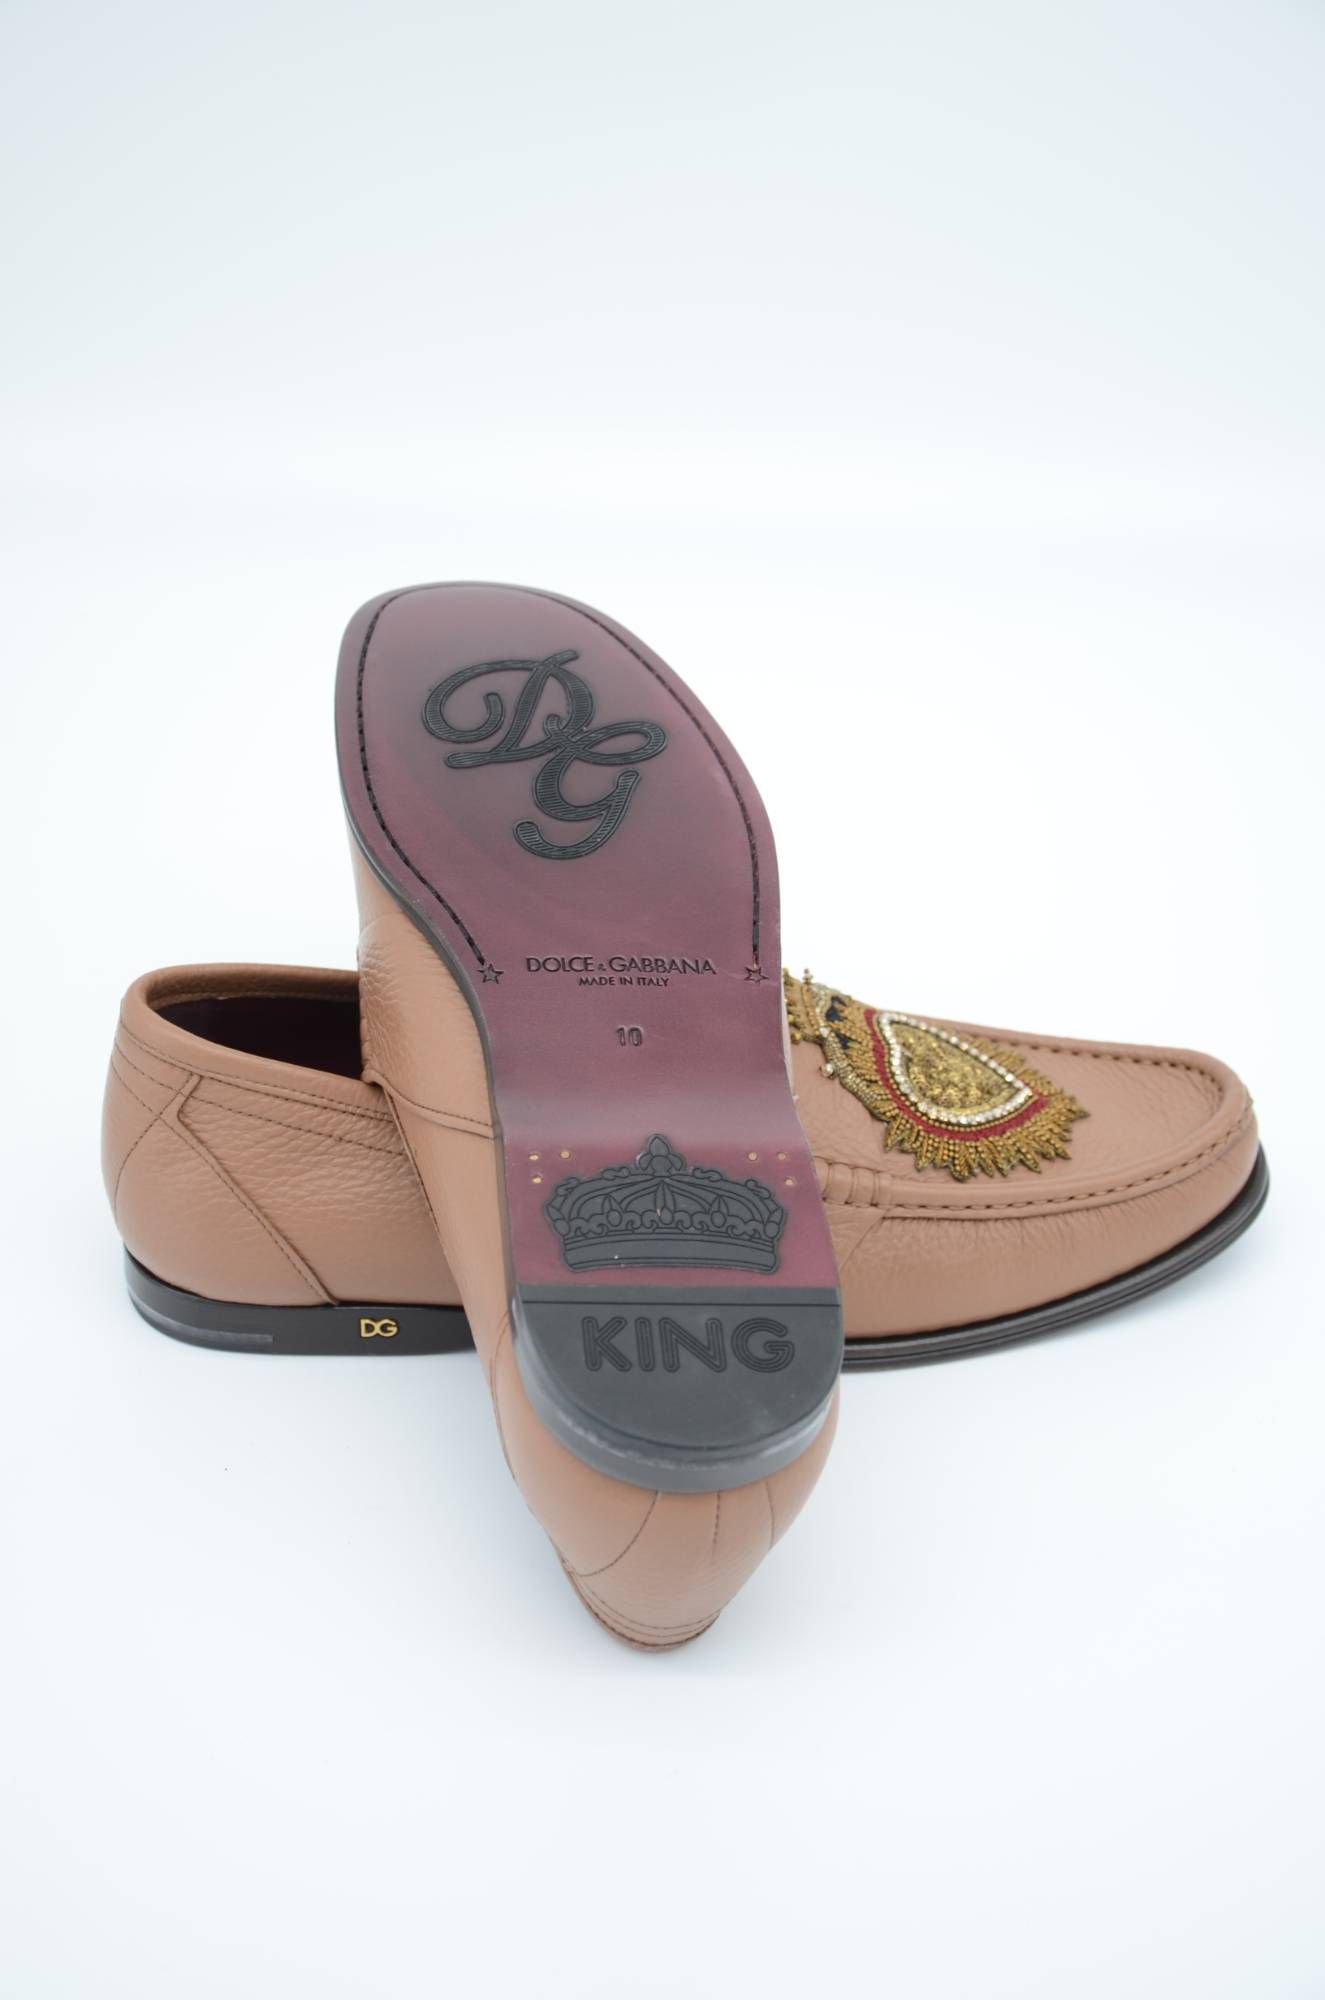 Dolce & Gabbana Men Heart Leather Loafers
Embroidered Applications